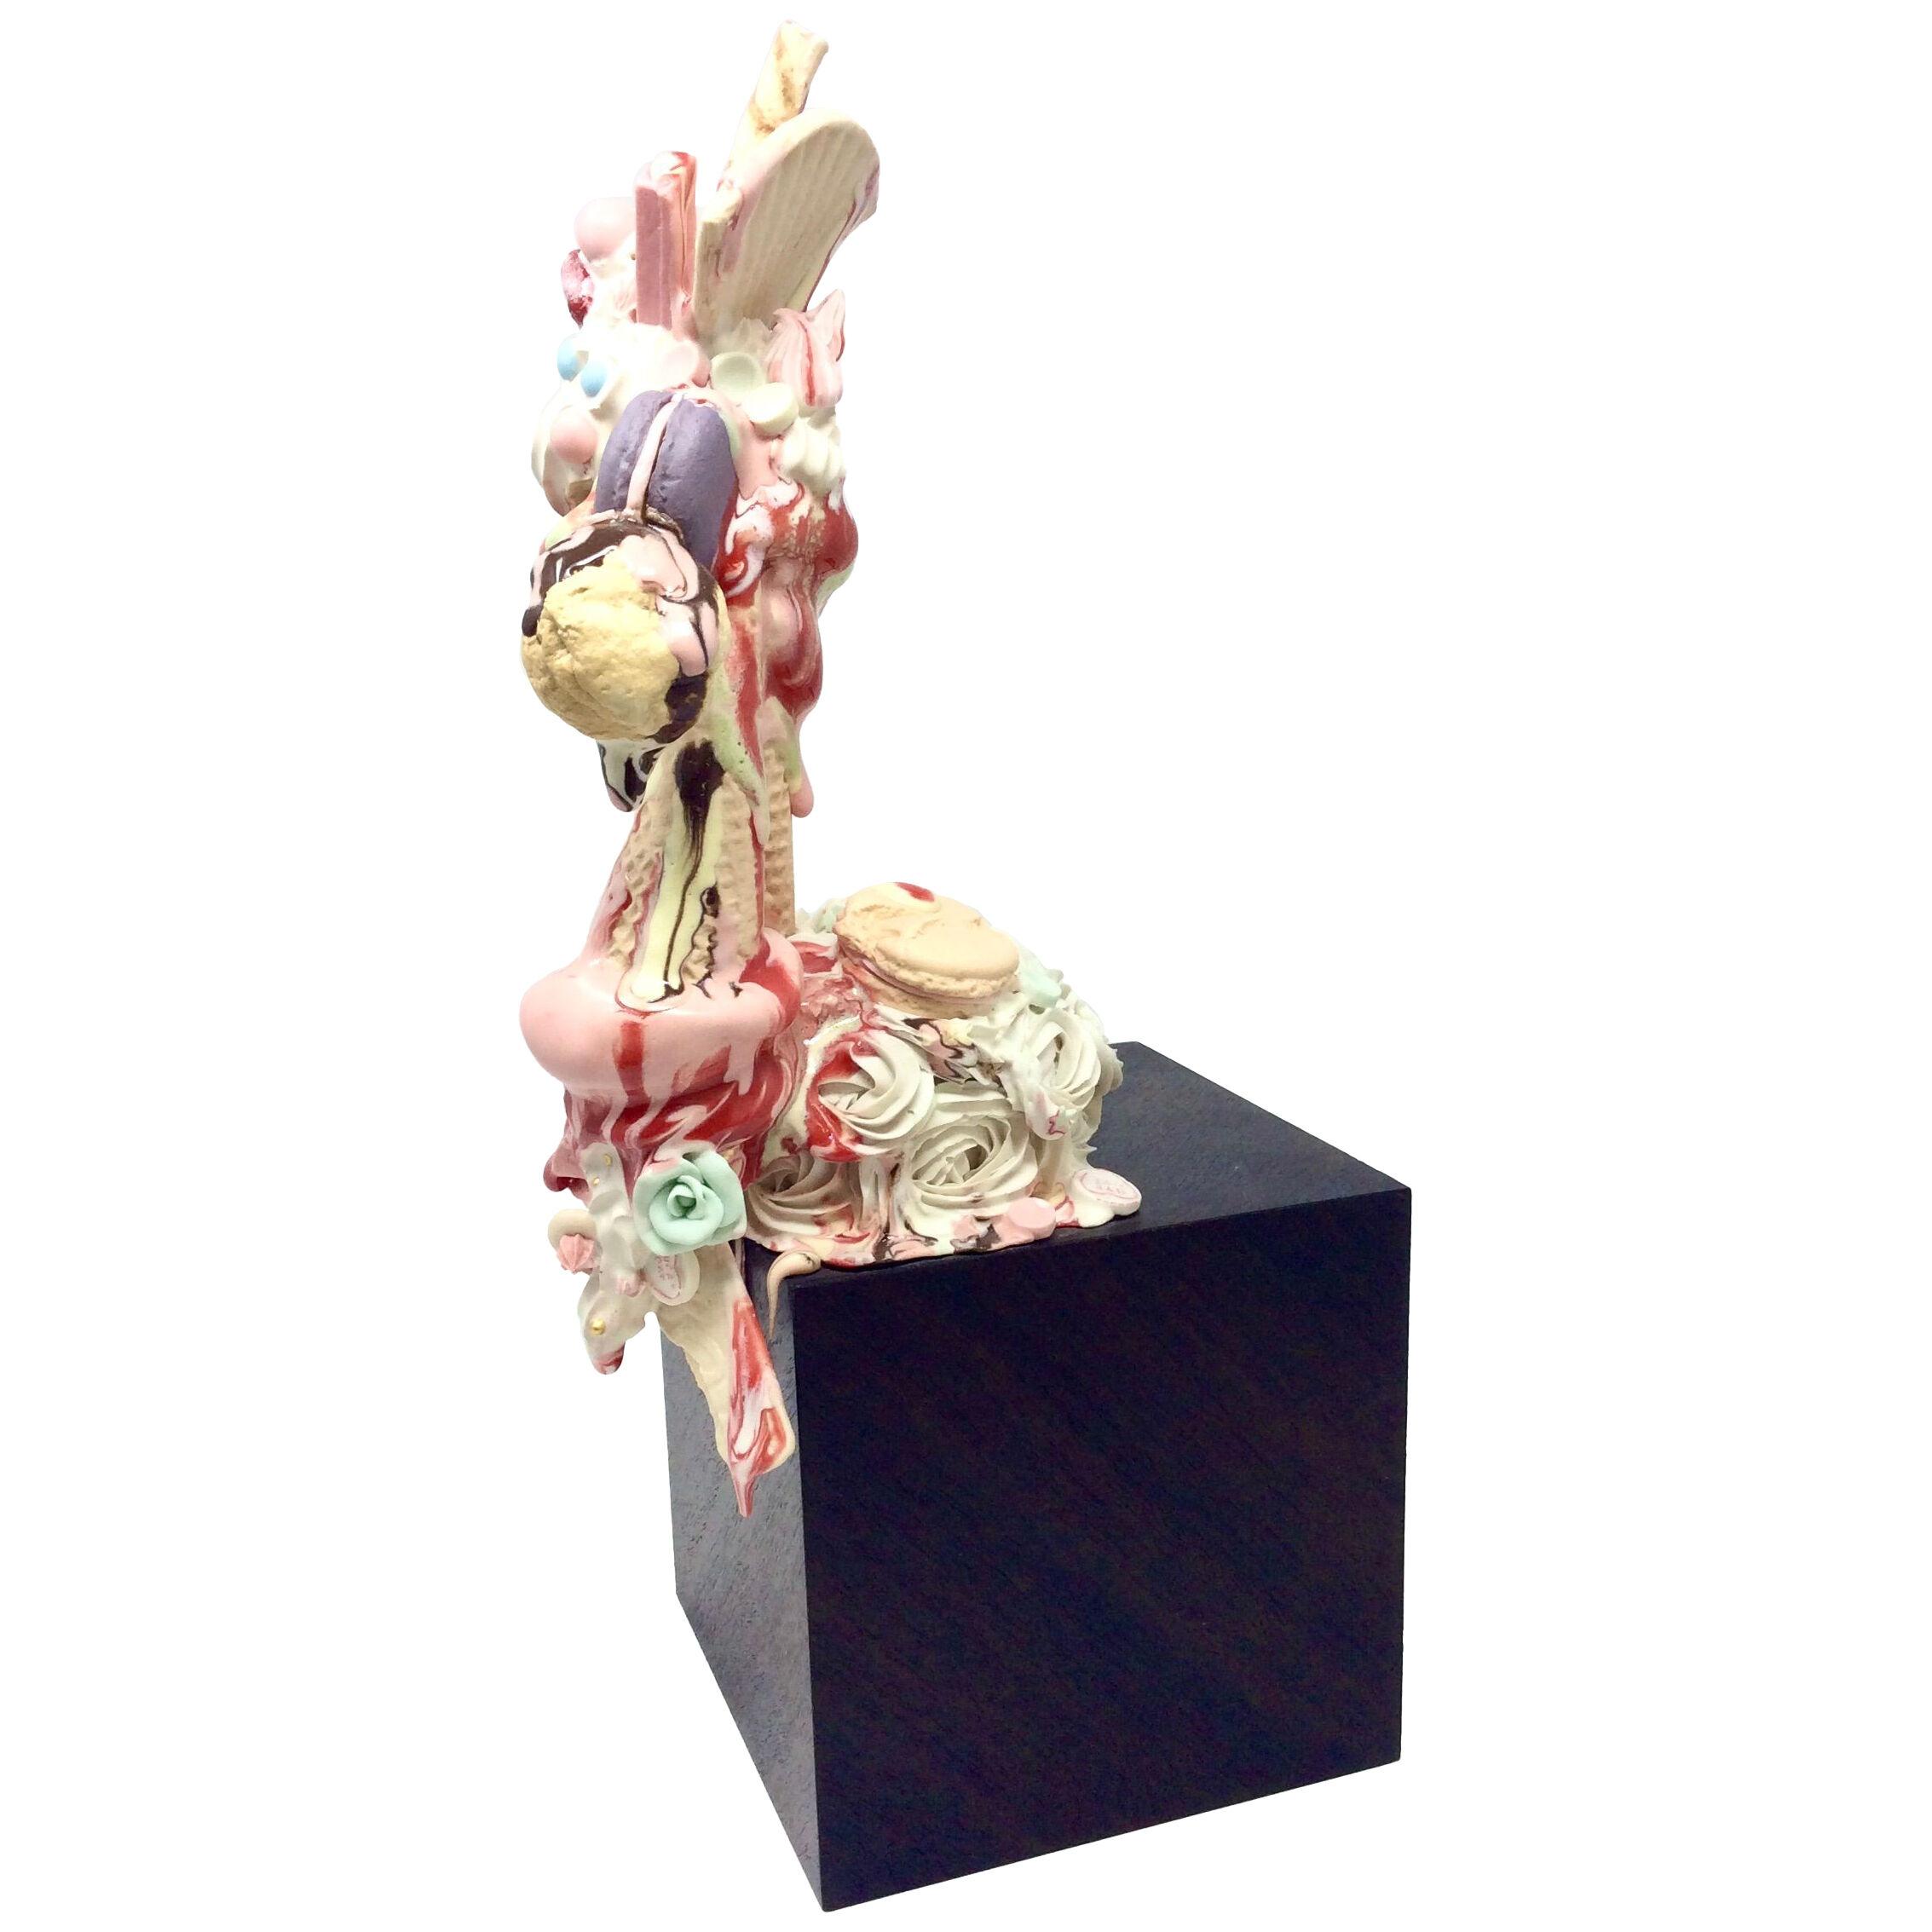 'Kit Kat' Contemporary Ceramic Sculpture by Anna Barlow